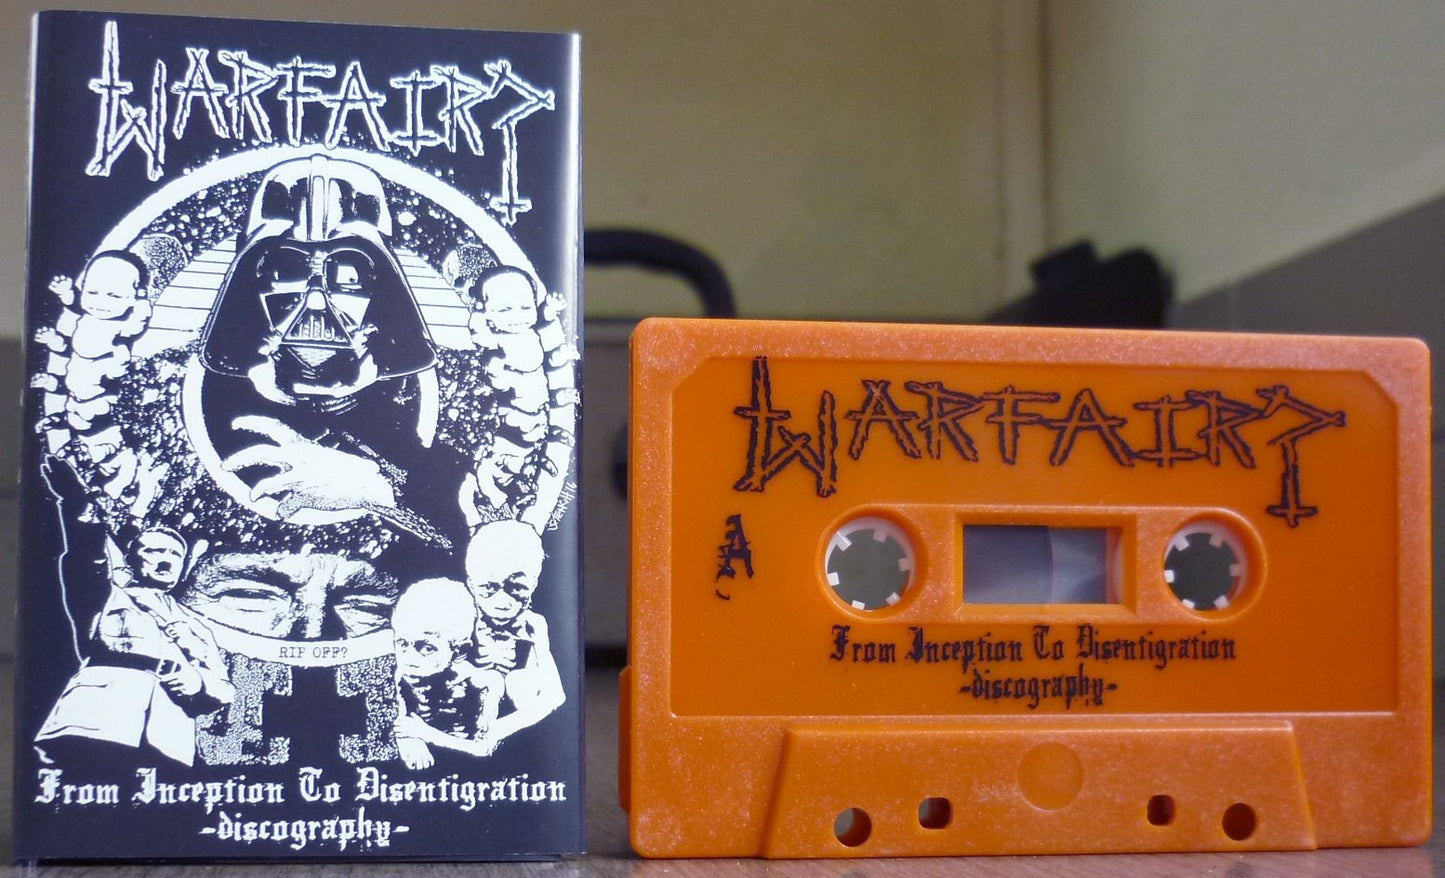 WARFAIR? - From Inception To Disentigration - Discography Tape